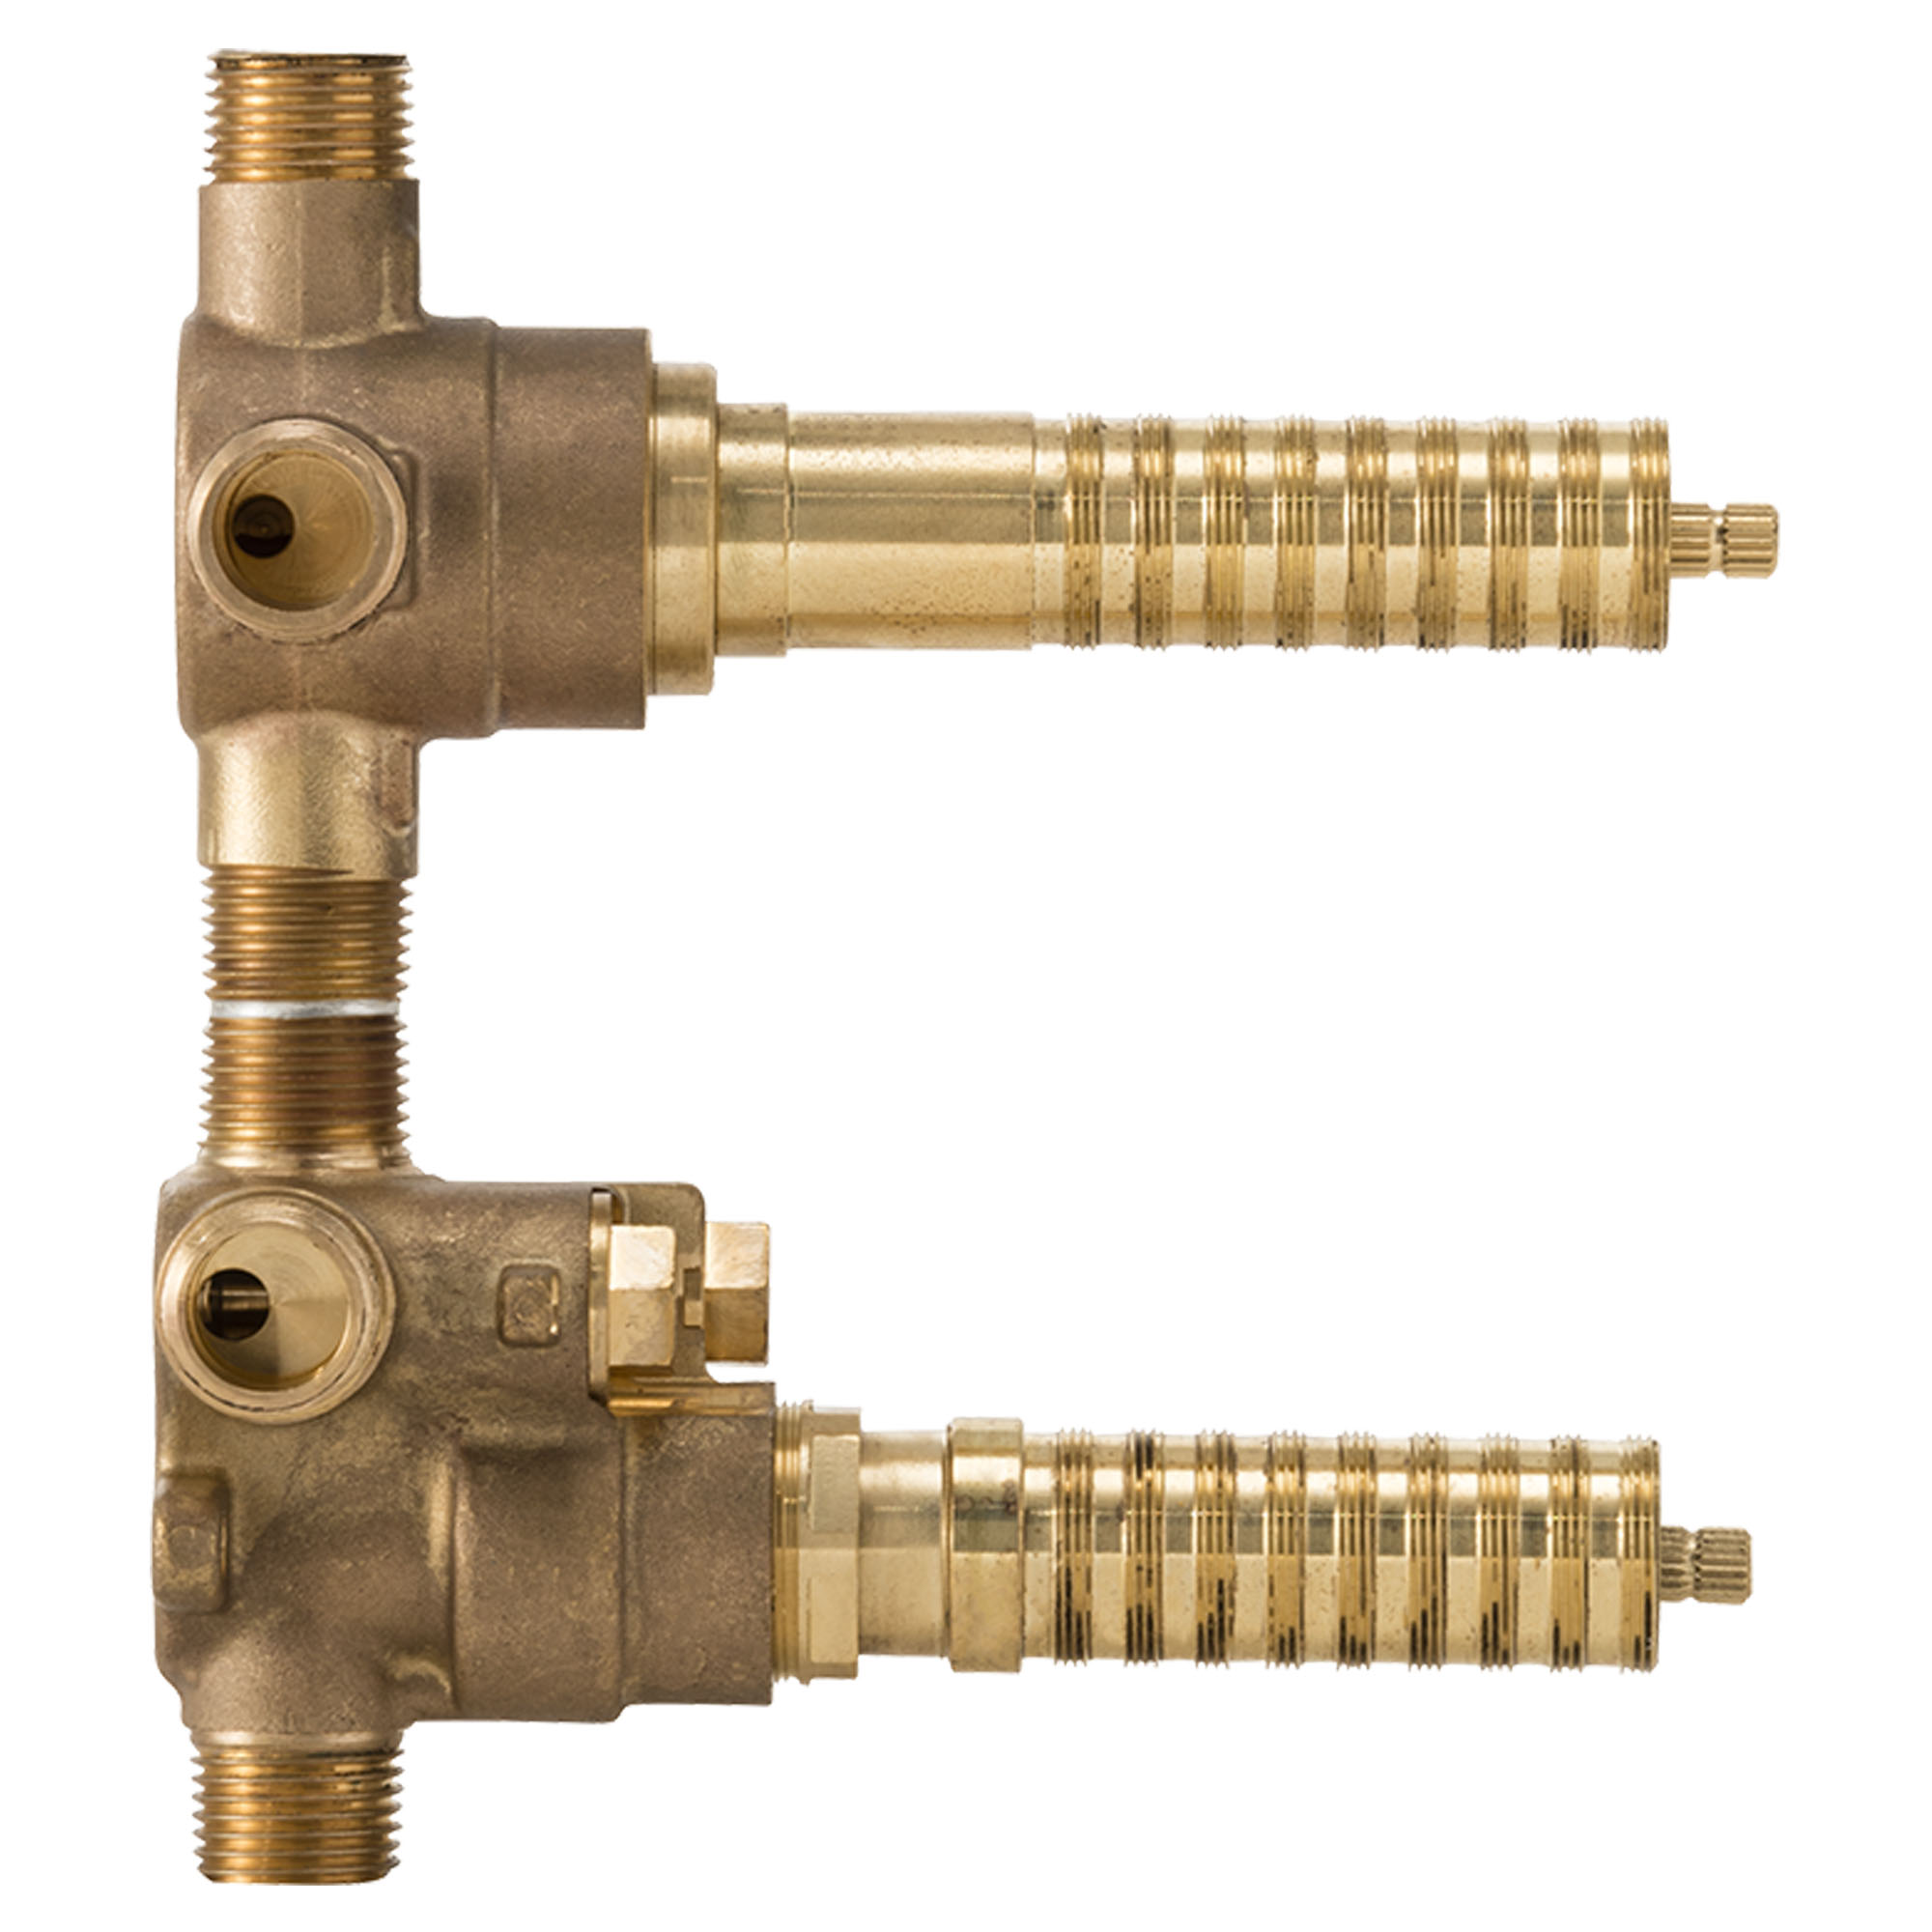 2-Handle Thermostatic Rough Valve with 3-Way Diverter Shared Functions